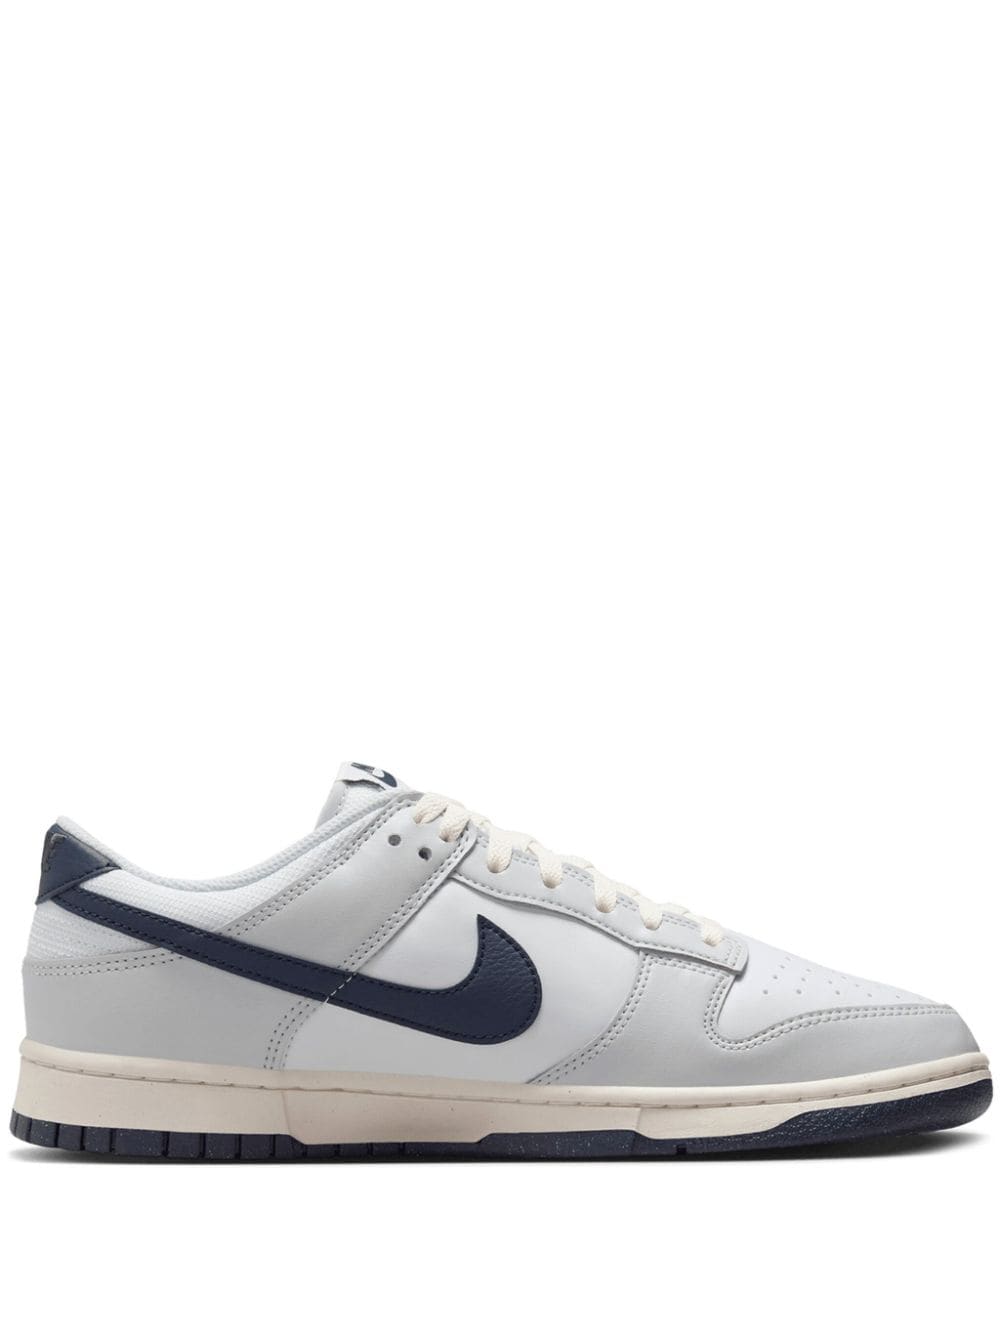 Nike Dunk Low Remastered sneakers White